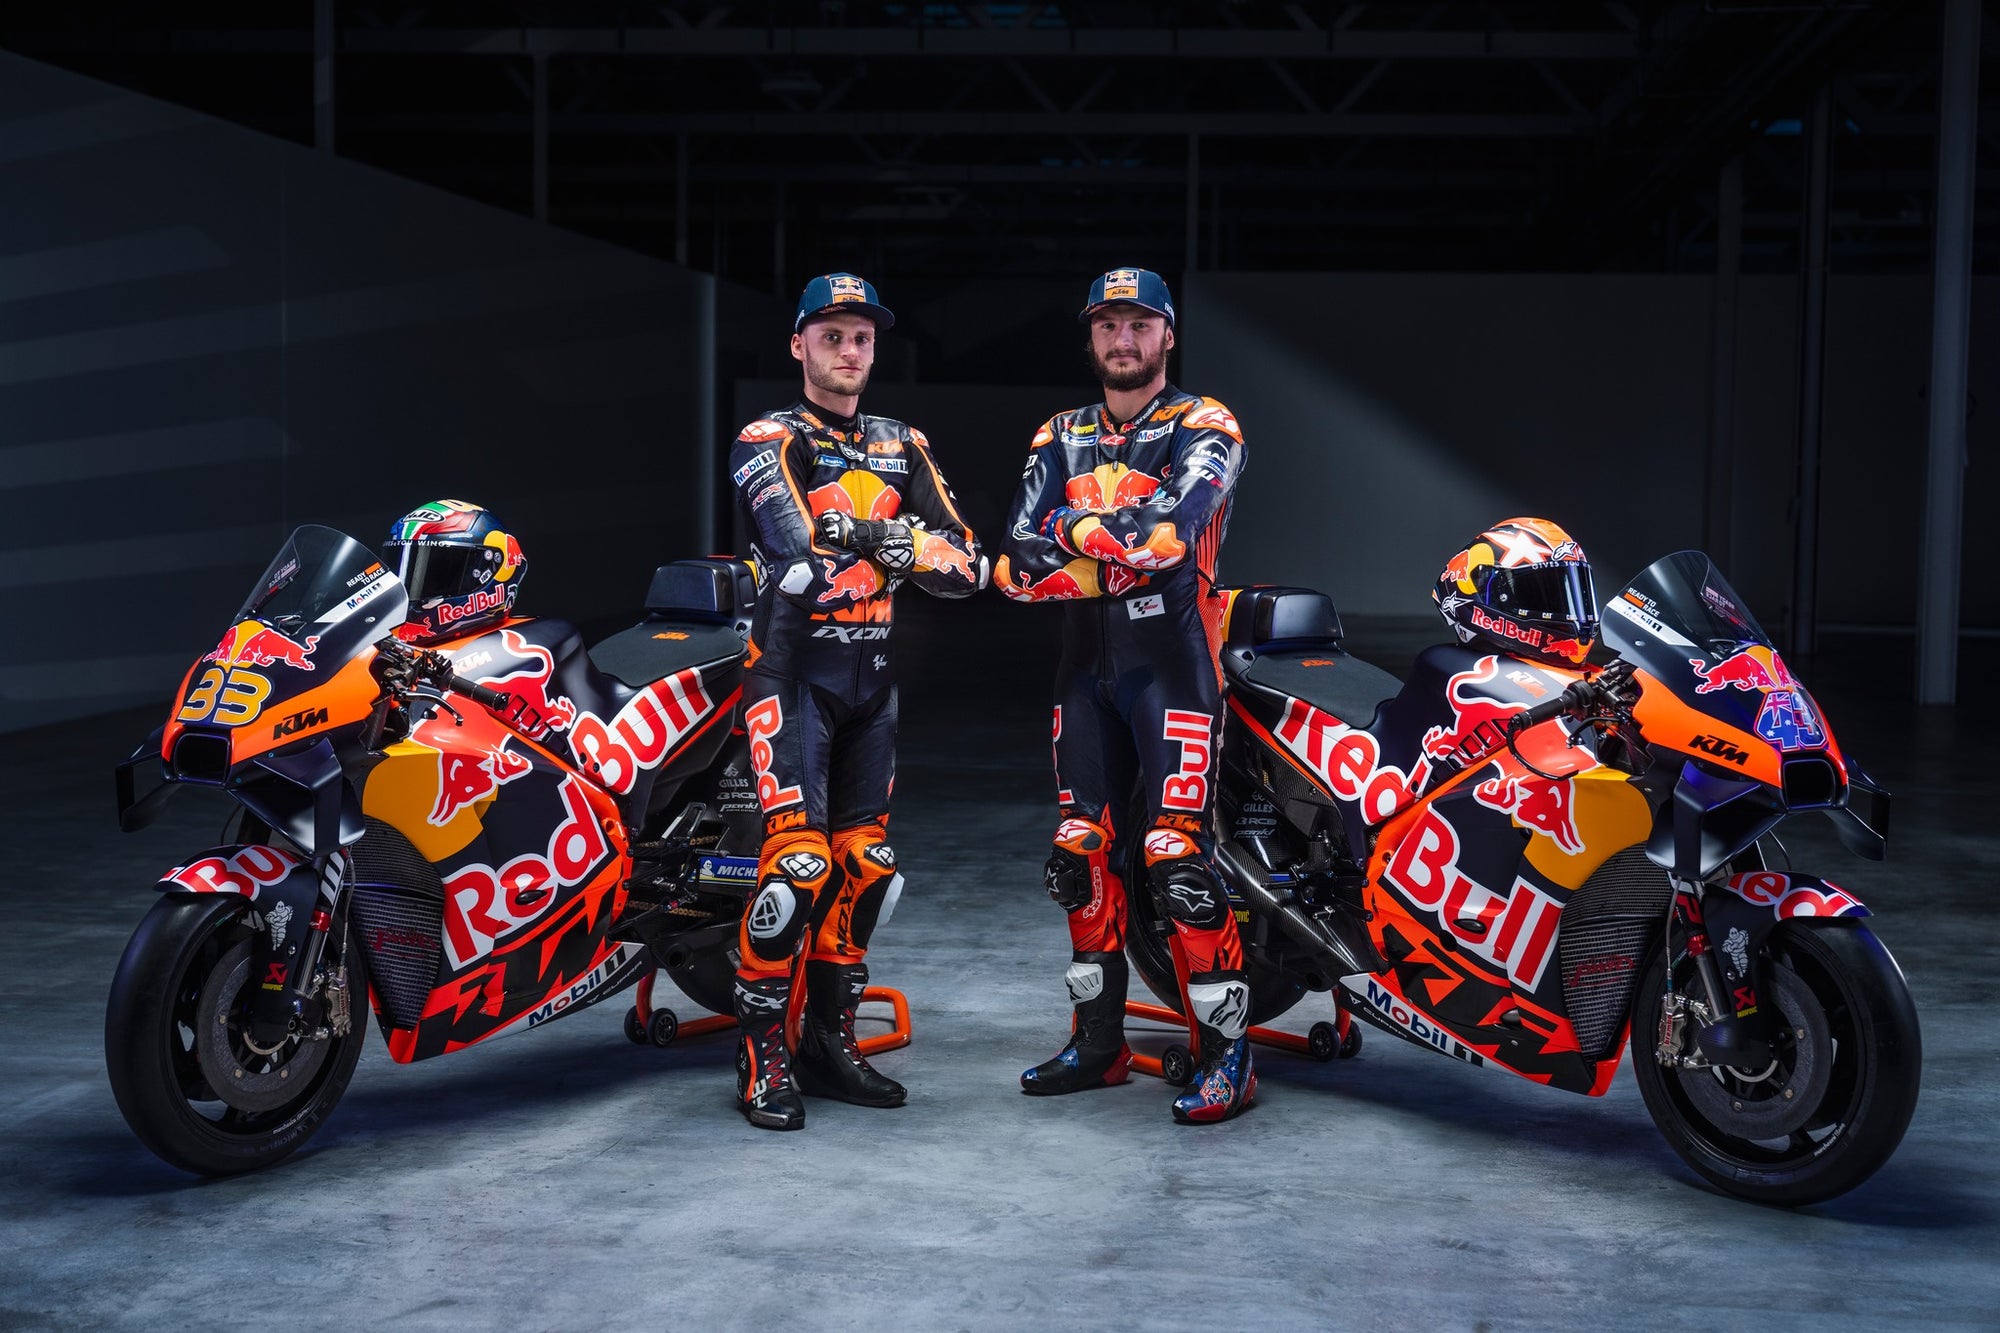 KTM have unveiled the new 2023 livery and riders with Jack Miller being unveiled in KTM colours for the first time!